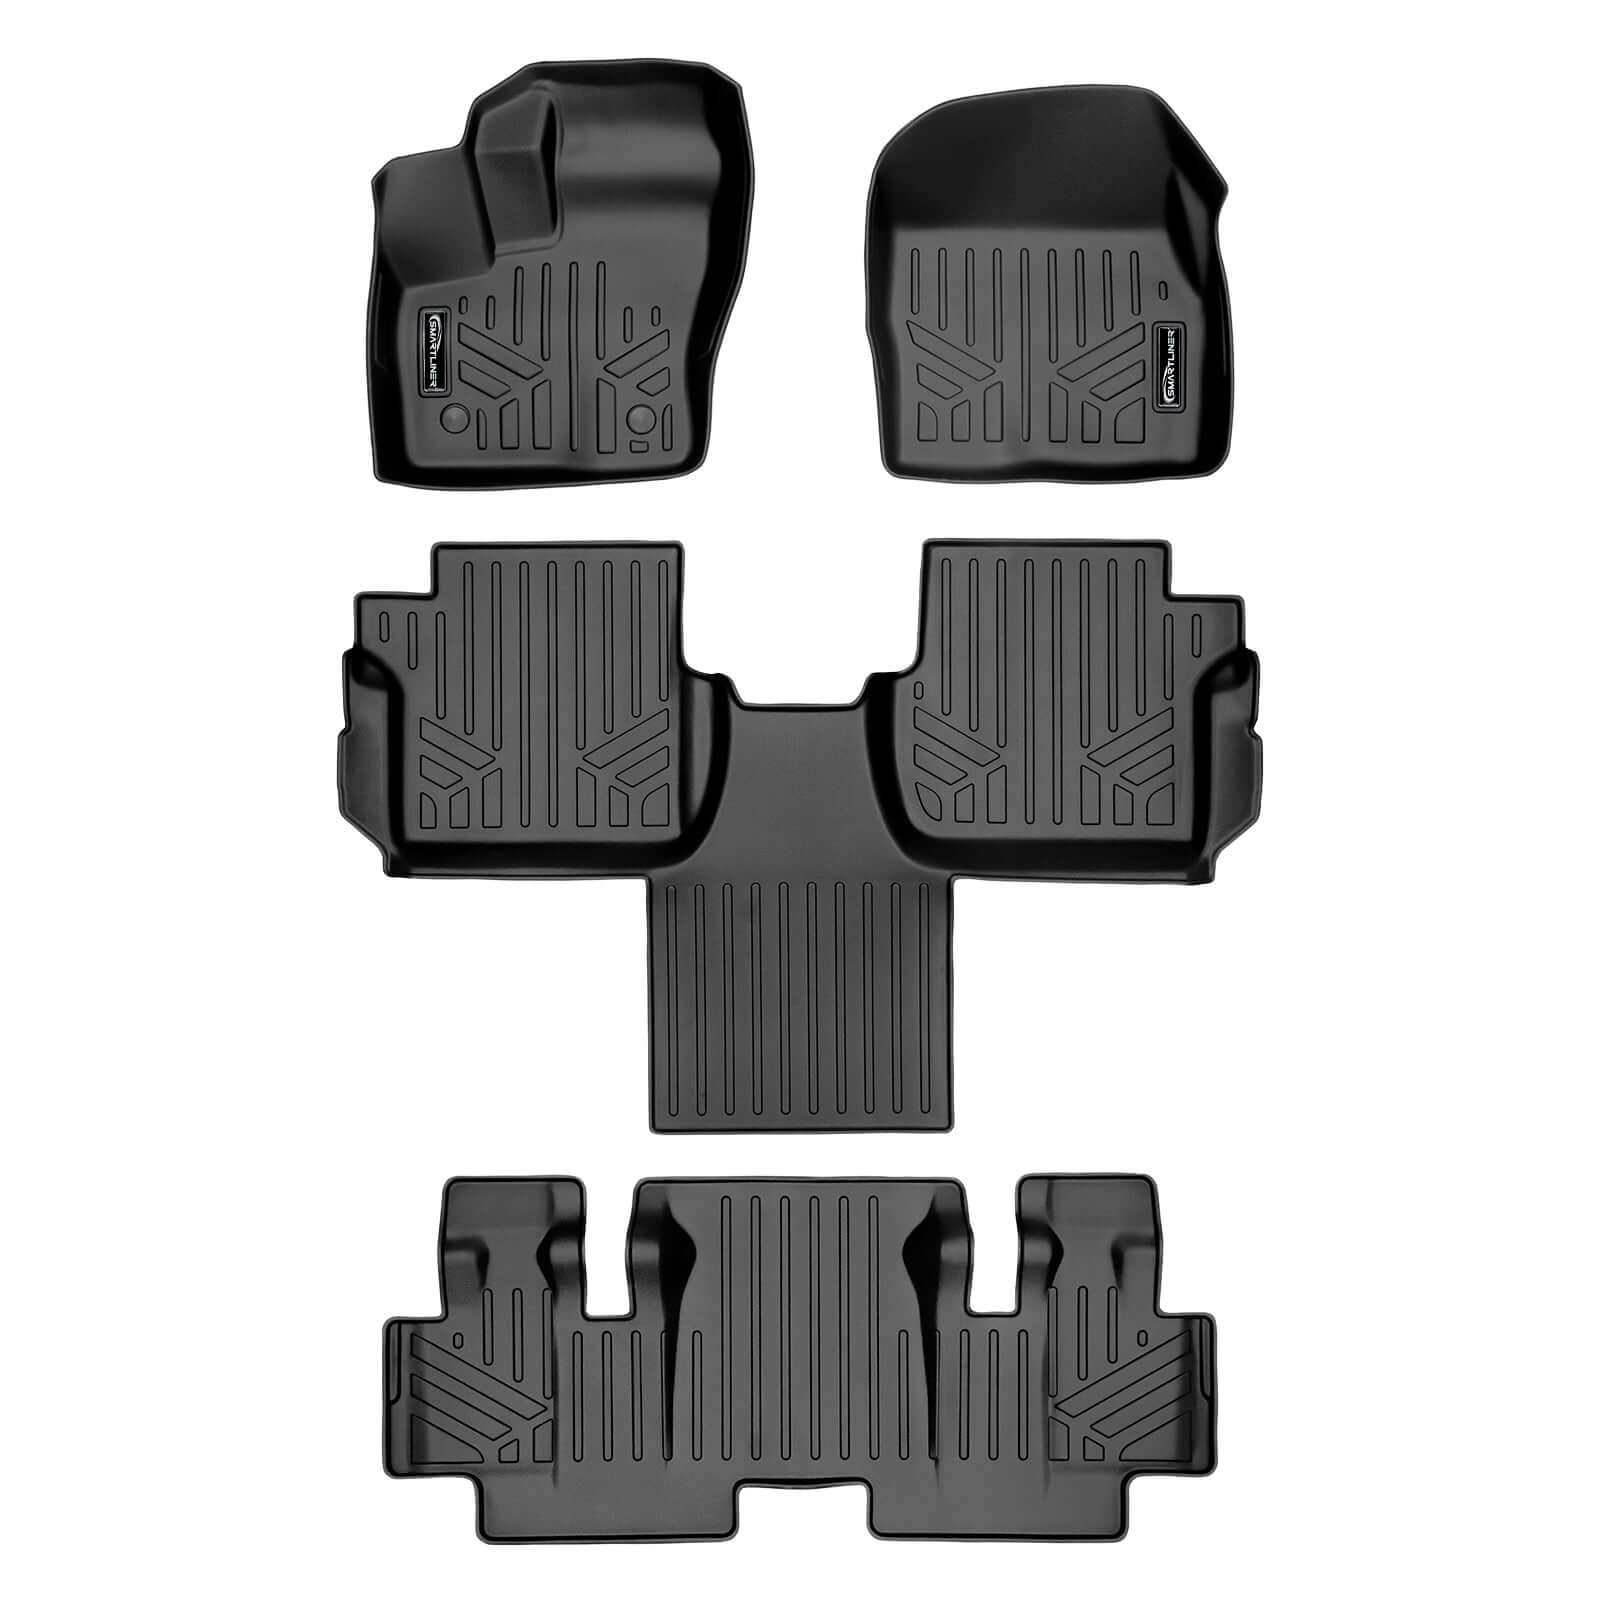 SMARTLINER Custom Fit Floor Liners For 2014-2021 Transit Connect With Carpet Flooring (Long Wheelbase & 2nd Row Bucket Seats)